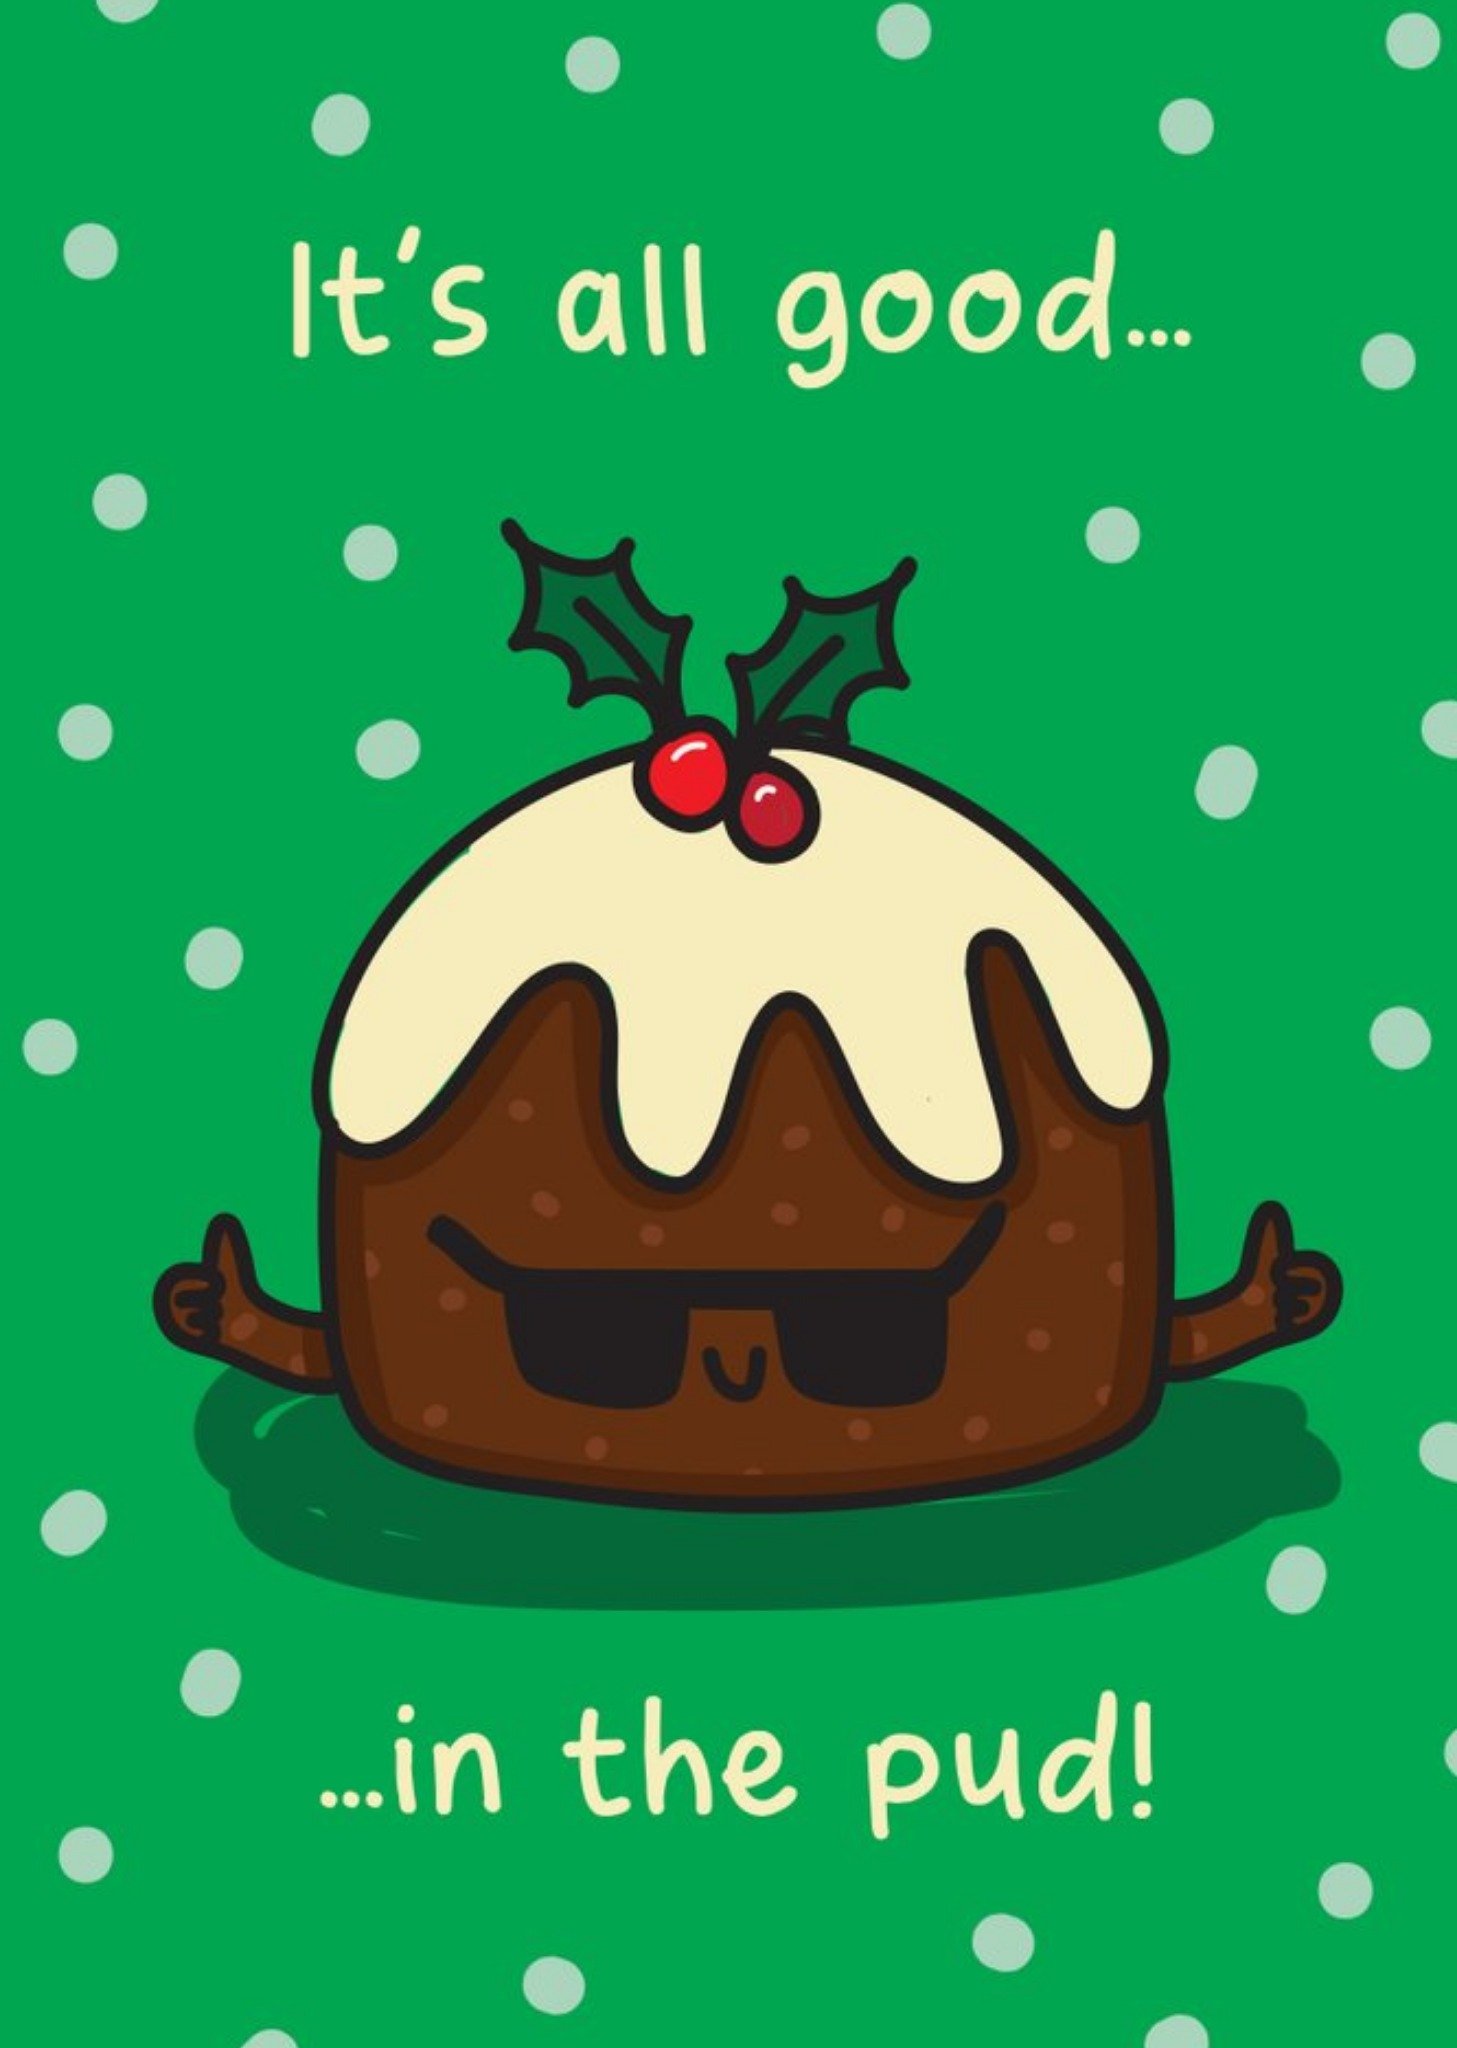 Moonpig Funny Pun It's All Good In The Pud Christmas Card, Large